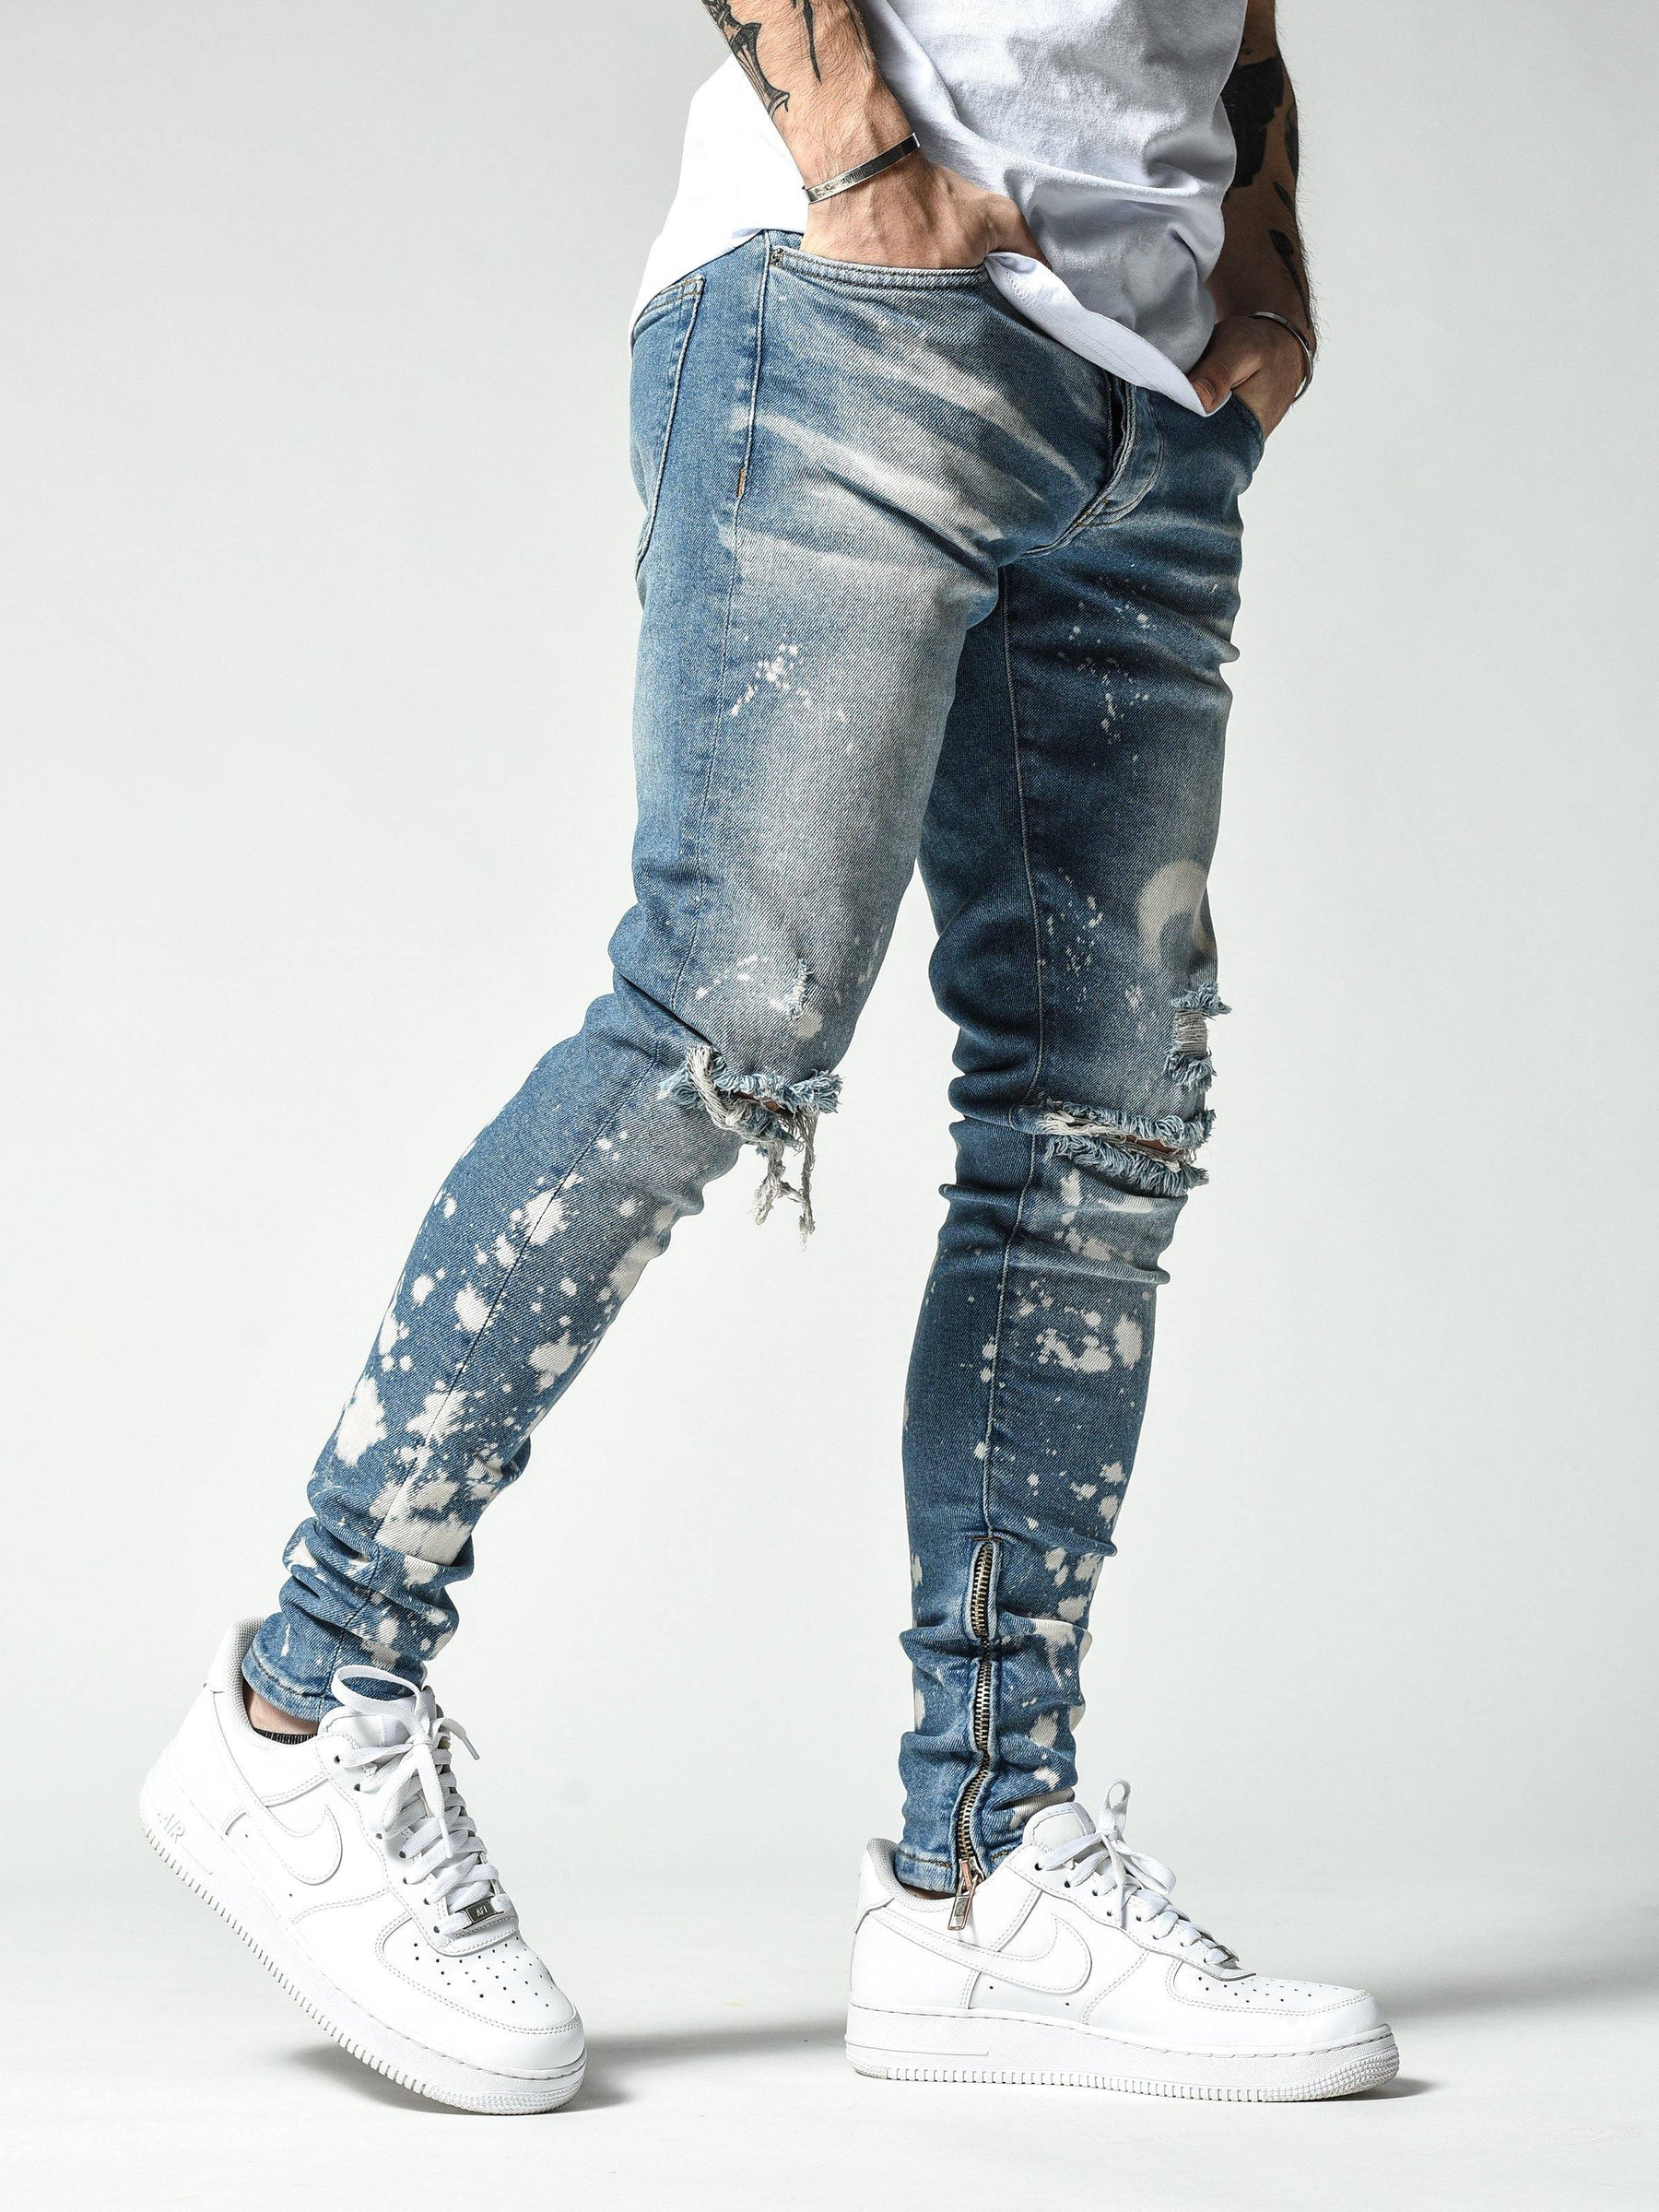 Moon Bleached Jeans 4828